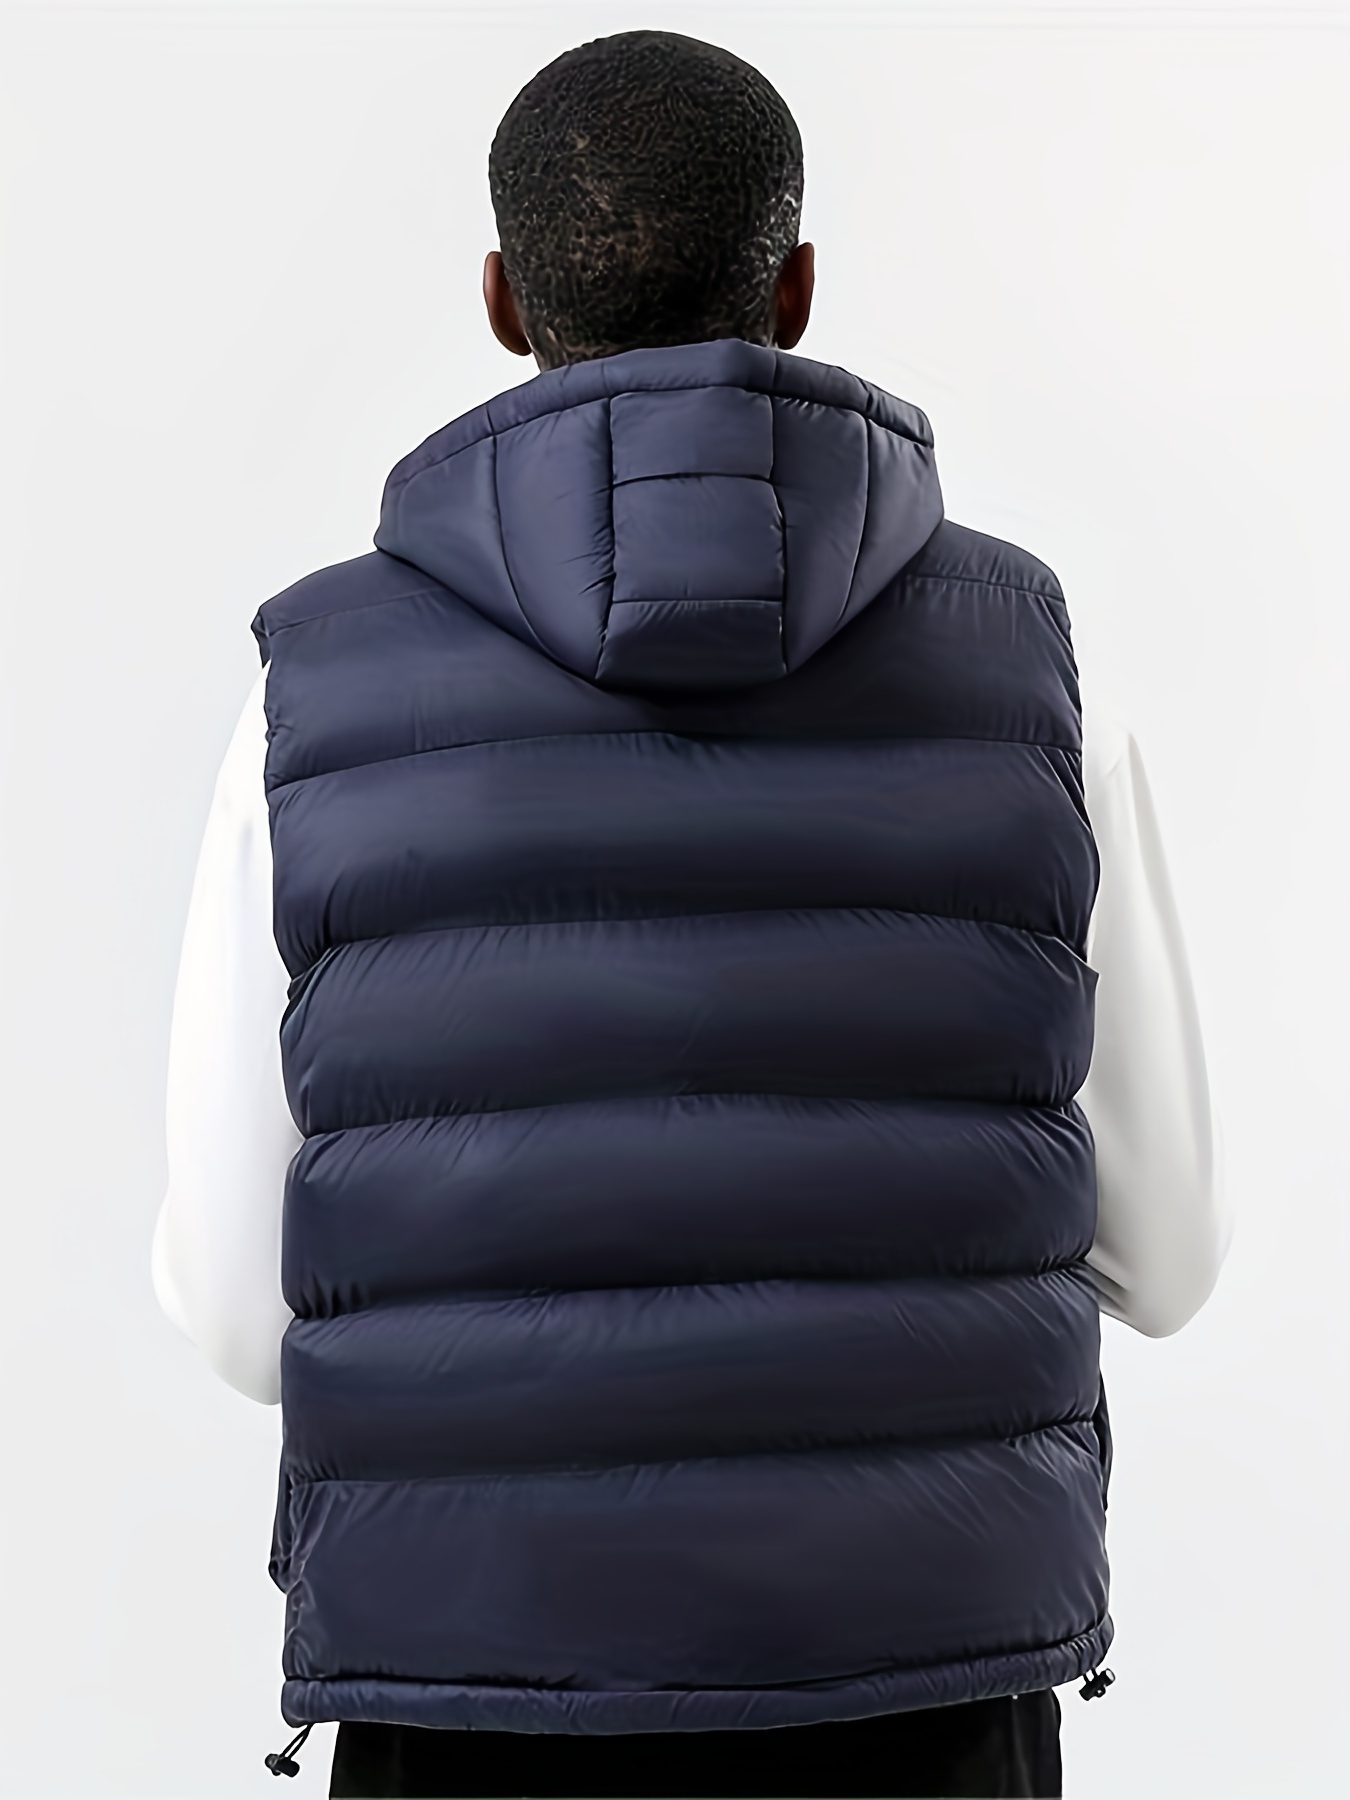 Navy Padded Zip Vest in Technical Fabric